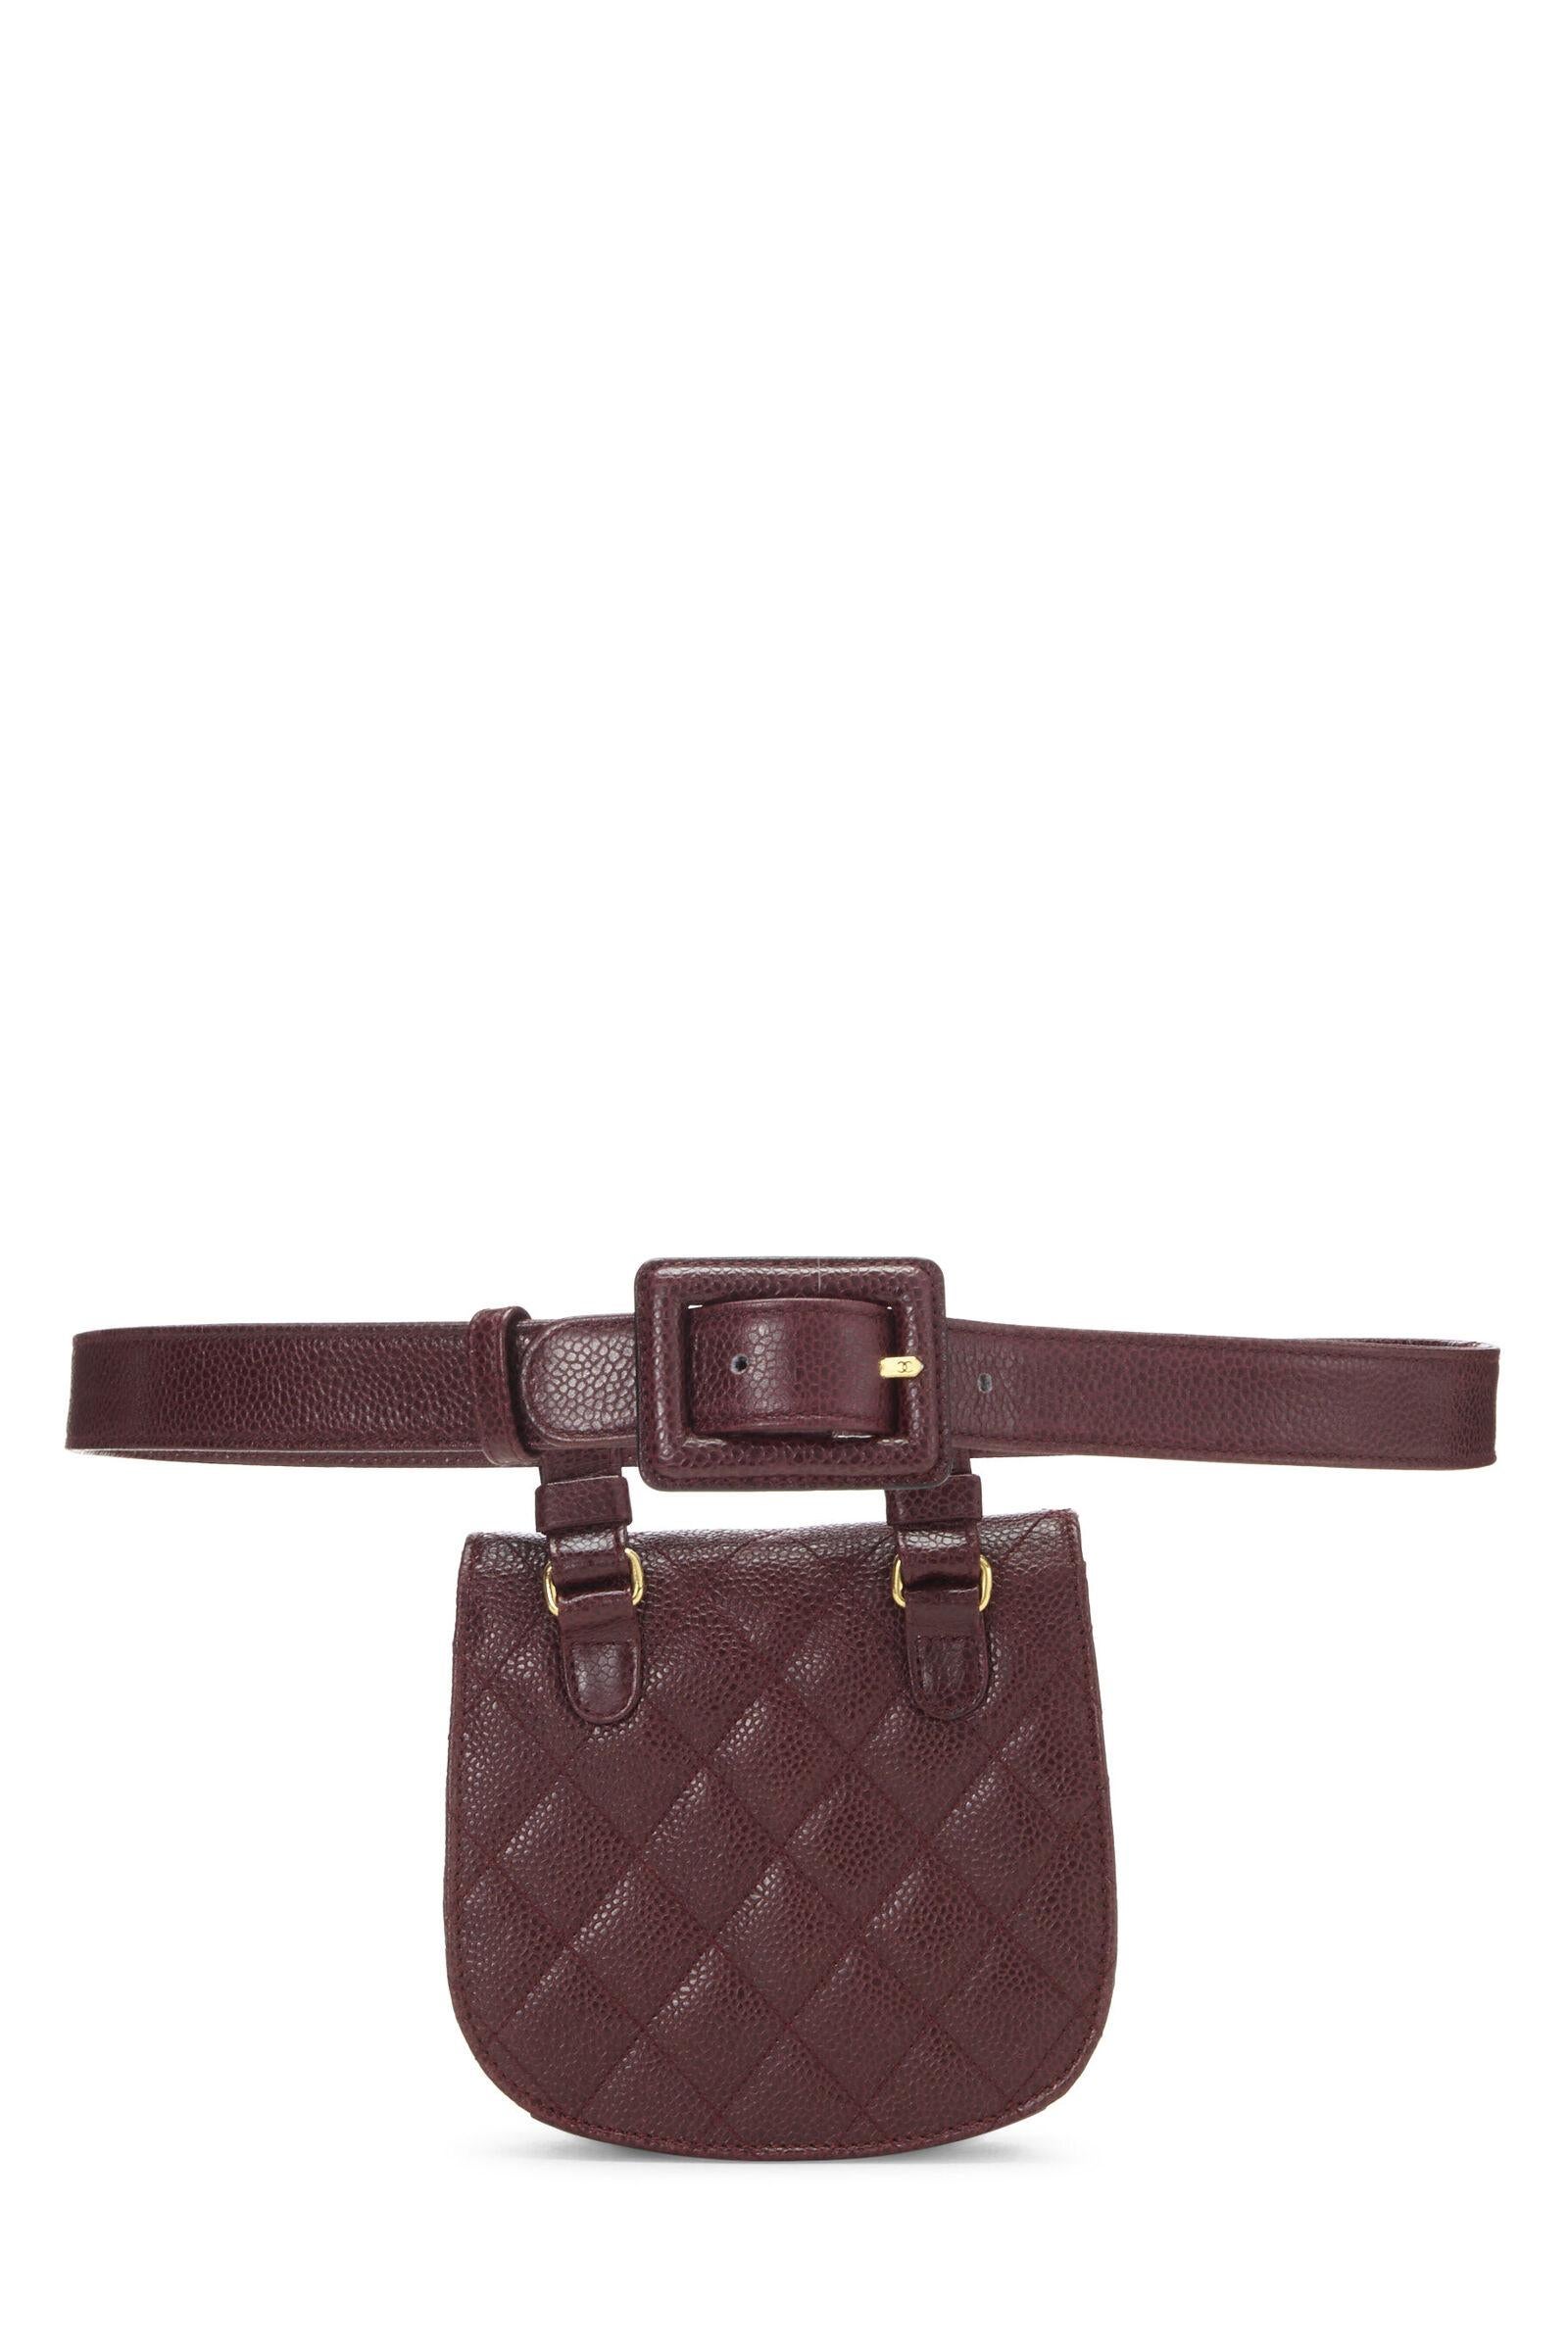 Women's Chanel 1991 Classic Flap Red Burgundy Quilted Caviar Waist Belt Bag For Sale